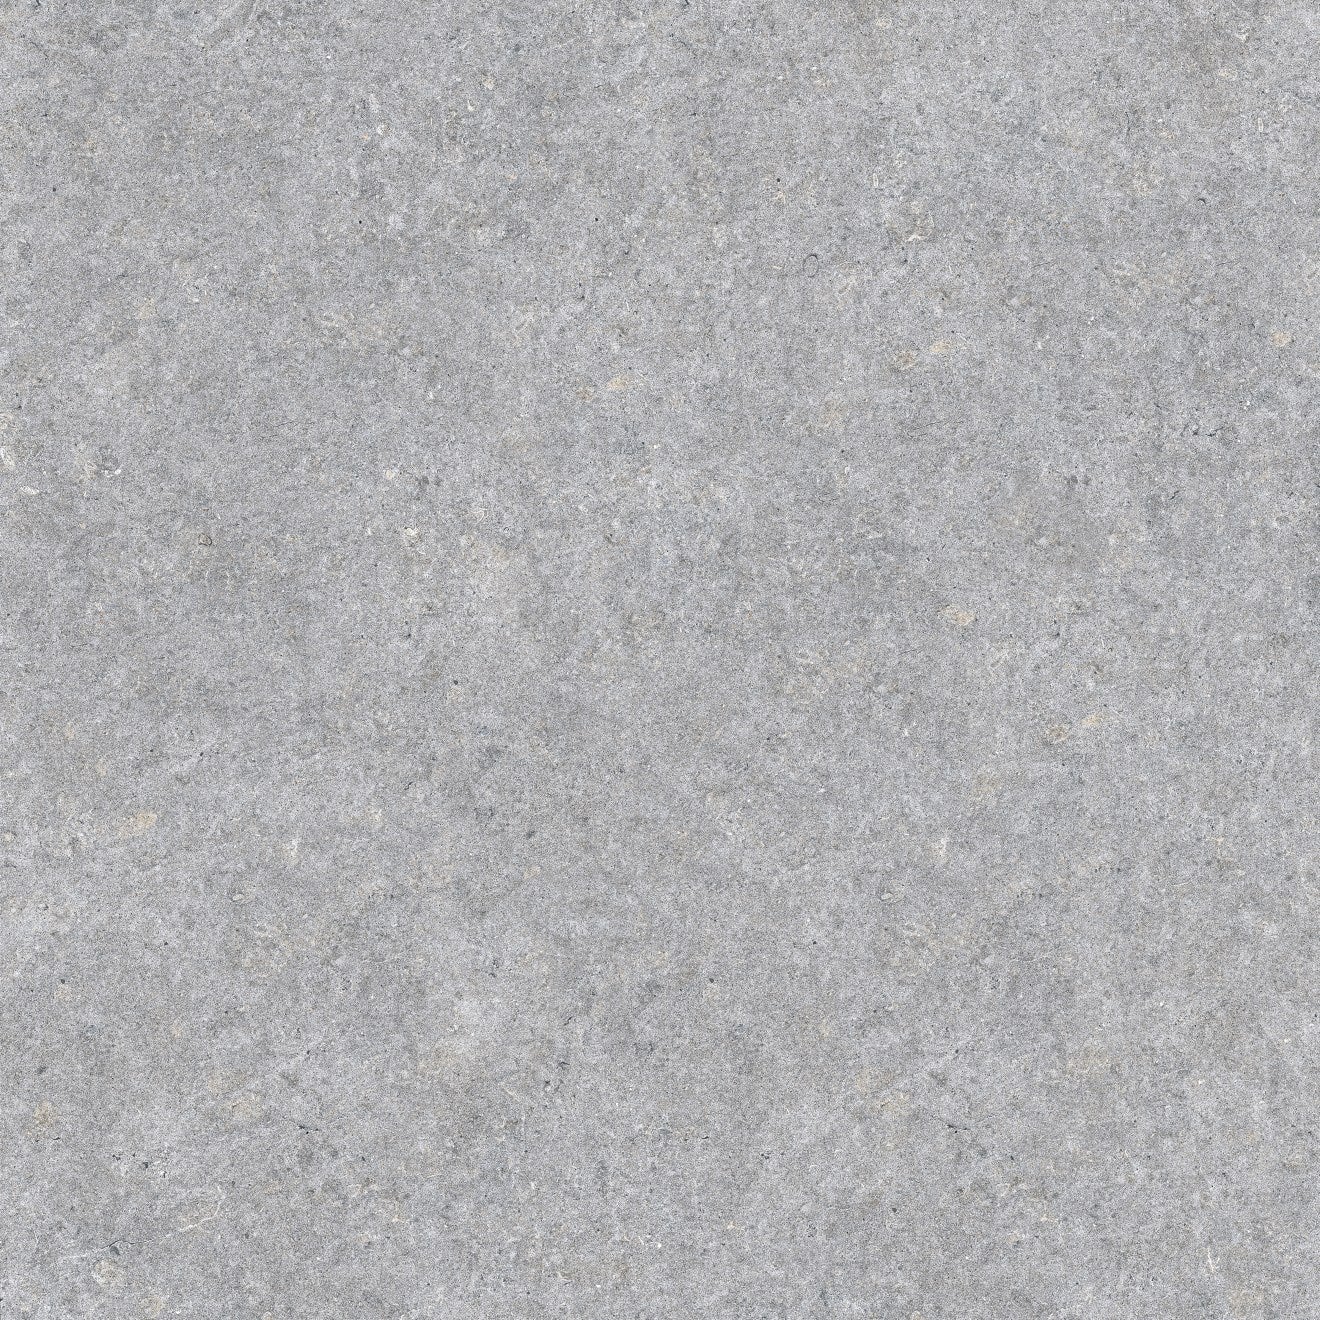 Bedrosians Magnifica Nineteen Forty Eight 48" x 48" Shell Beach Polished Porcelain Tile